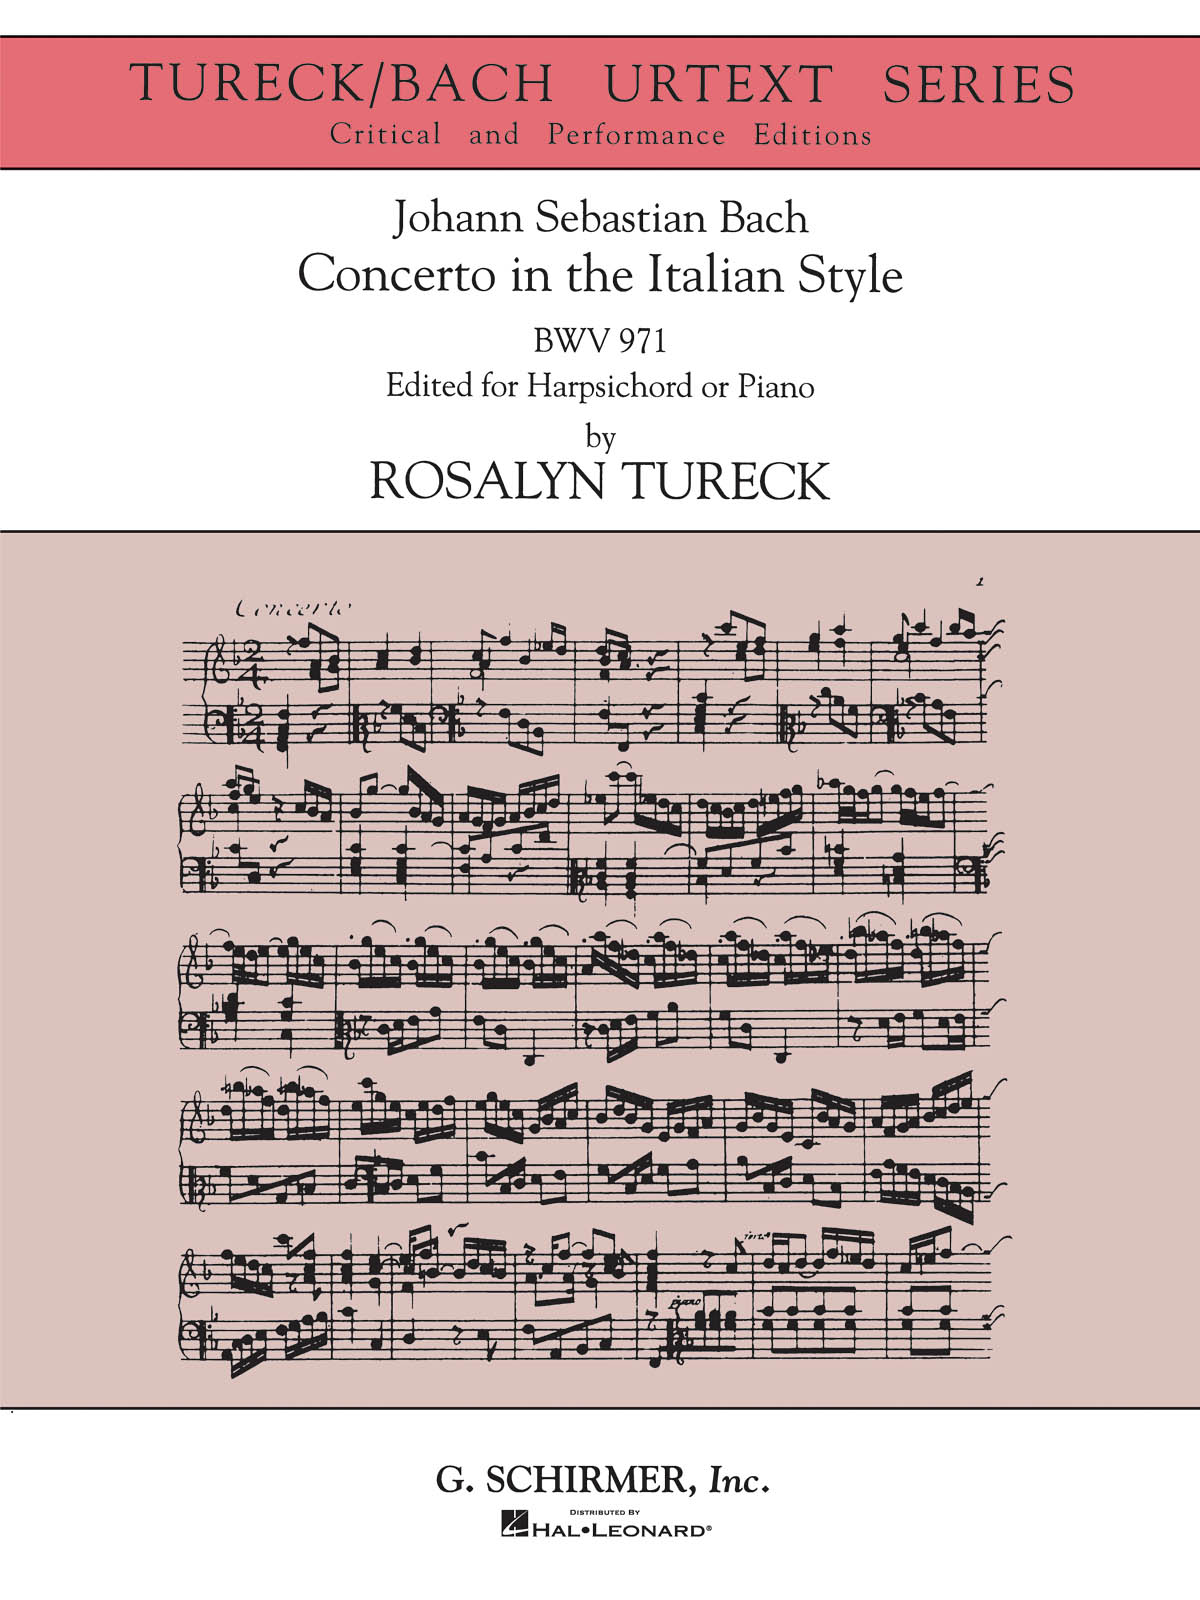 J. S. Bach: Concerto In The Italian Style (Schirmer Urtext Edition)